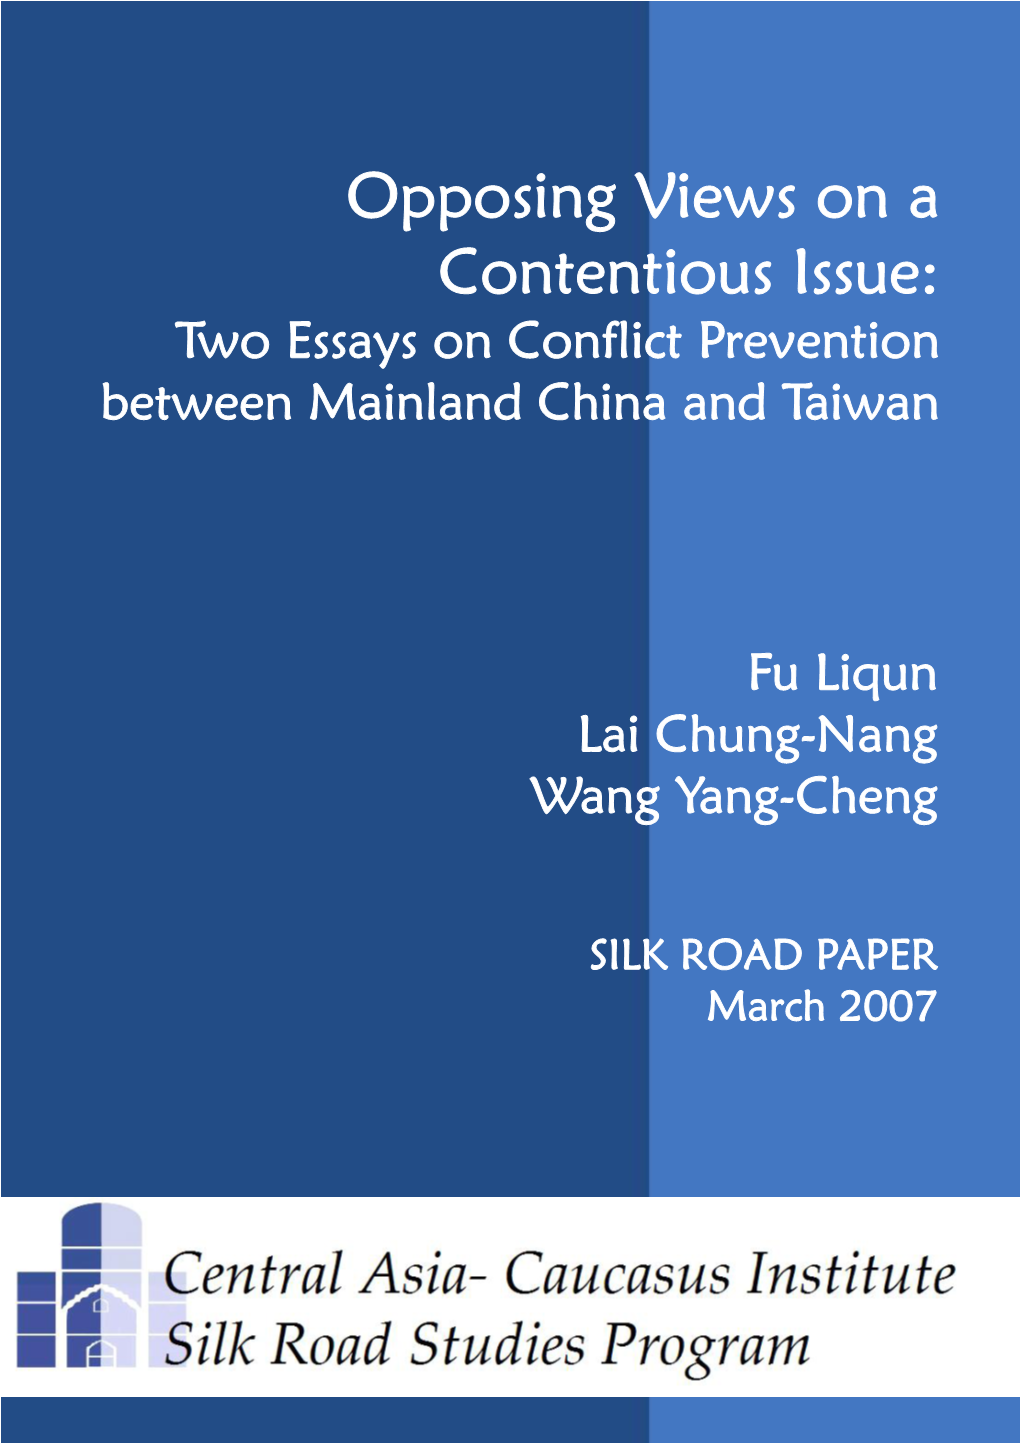 Opposing Views on a Contentious Issue: Two Essays on Conflict Prevention Between Mainland China and Taiwan